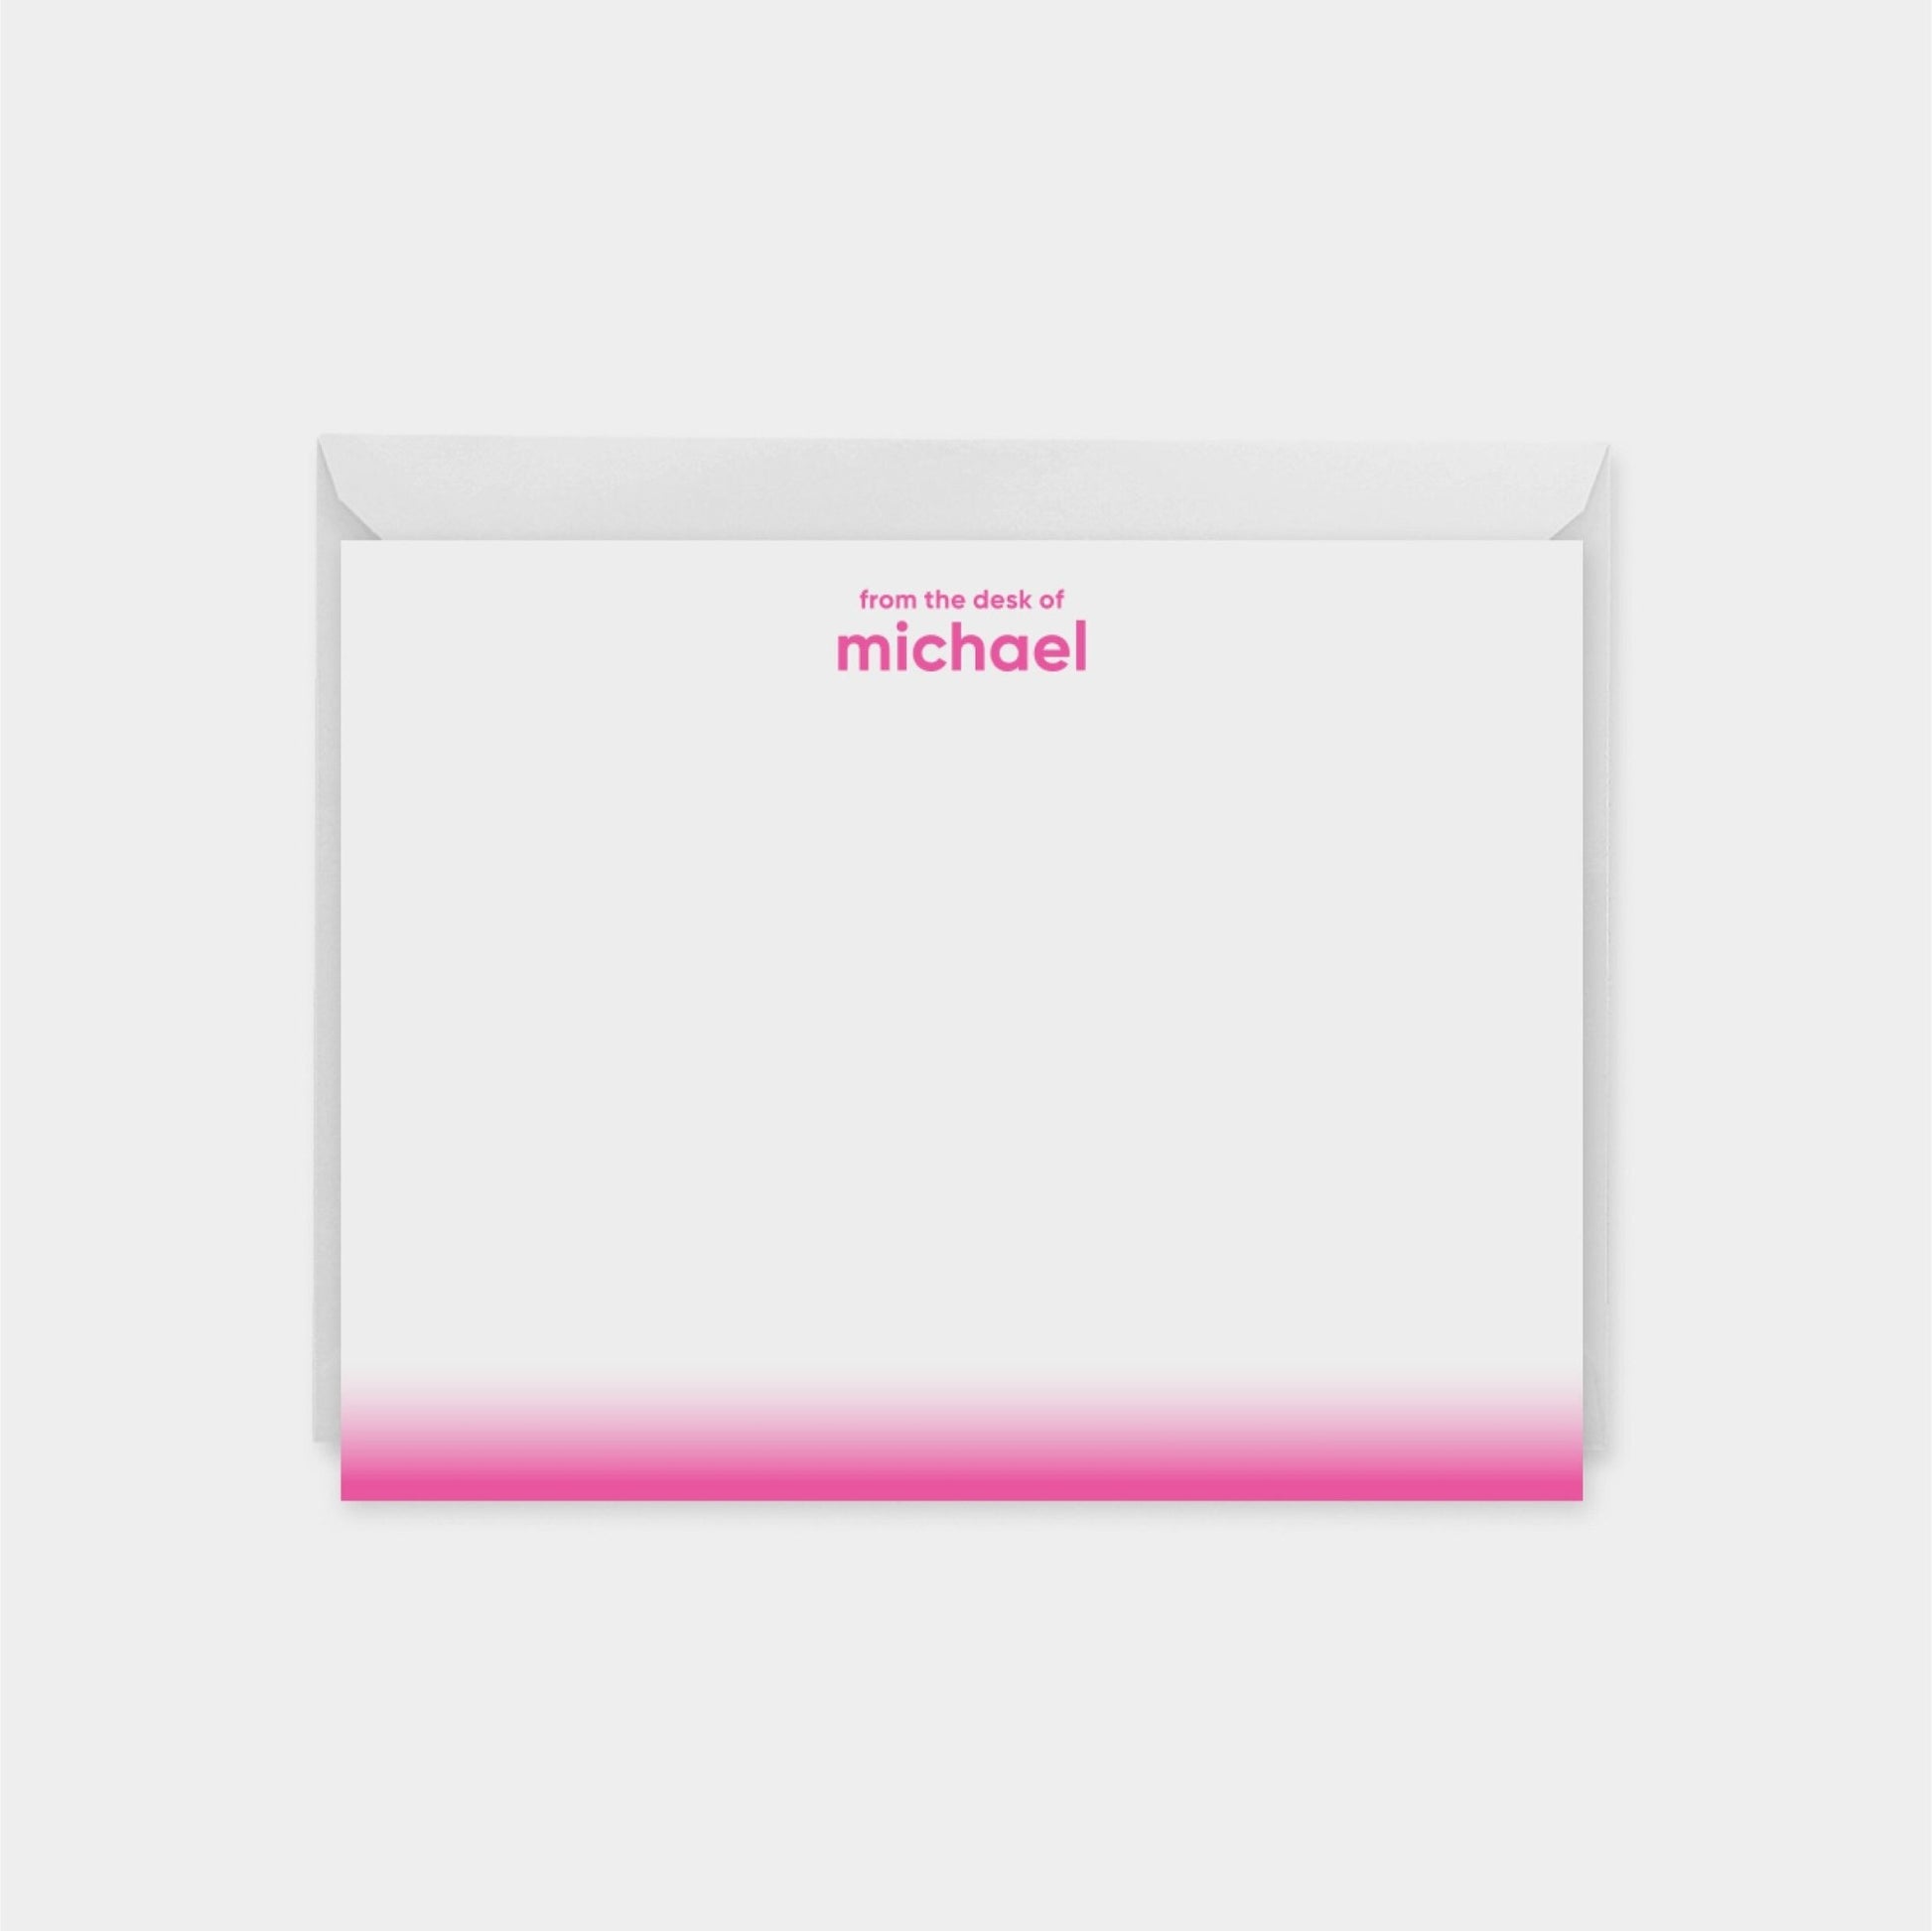 Neon Gradient Personalized Note Cards